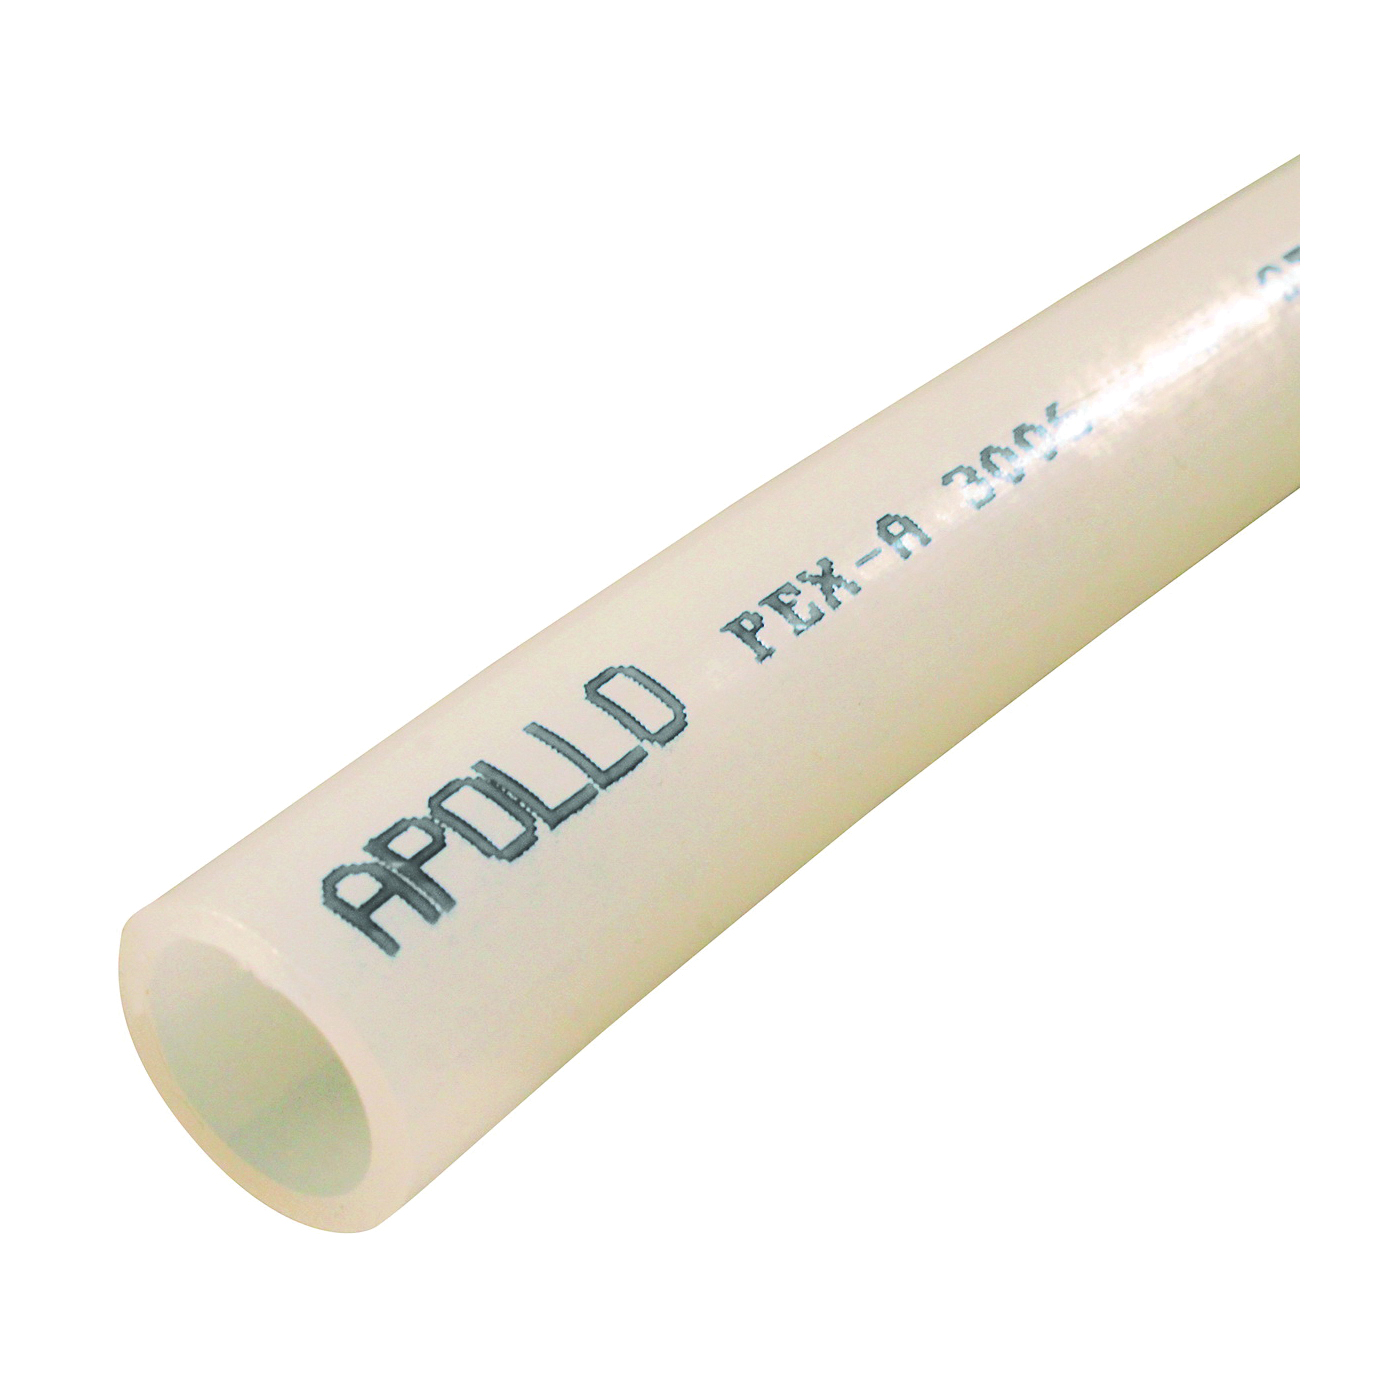 EPPW512 PEX-A Pipe Tubing, 1/2 in, Opaque, 5 ft L